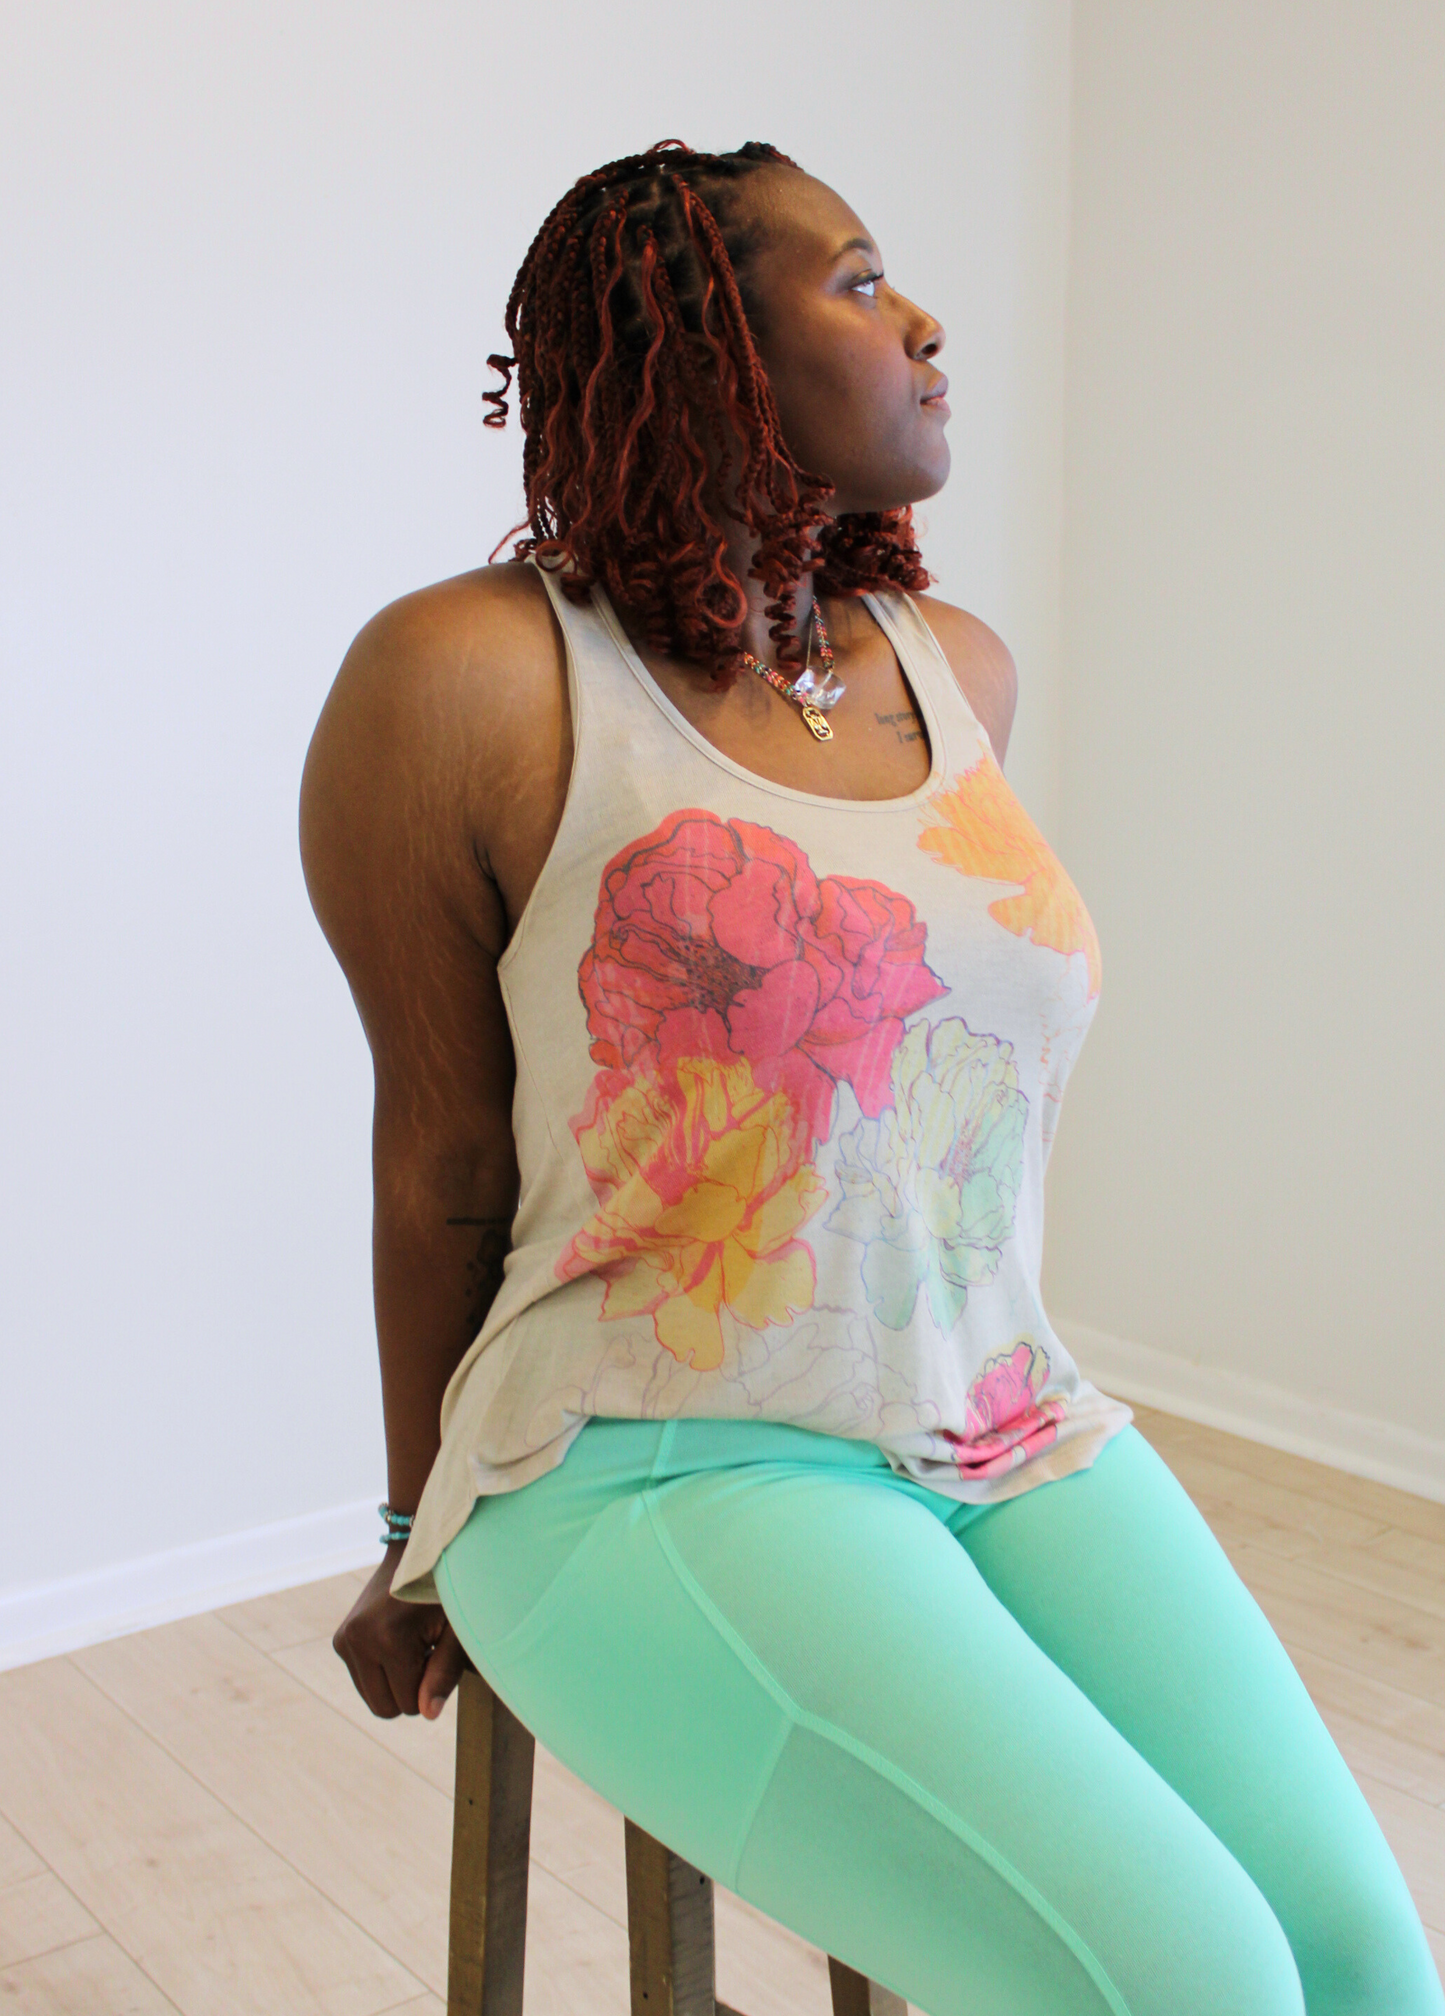 Ultra Soft Floral Impact Tank Top